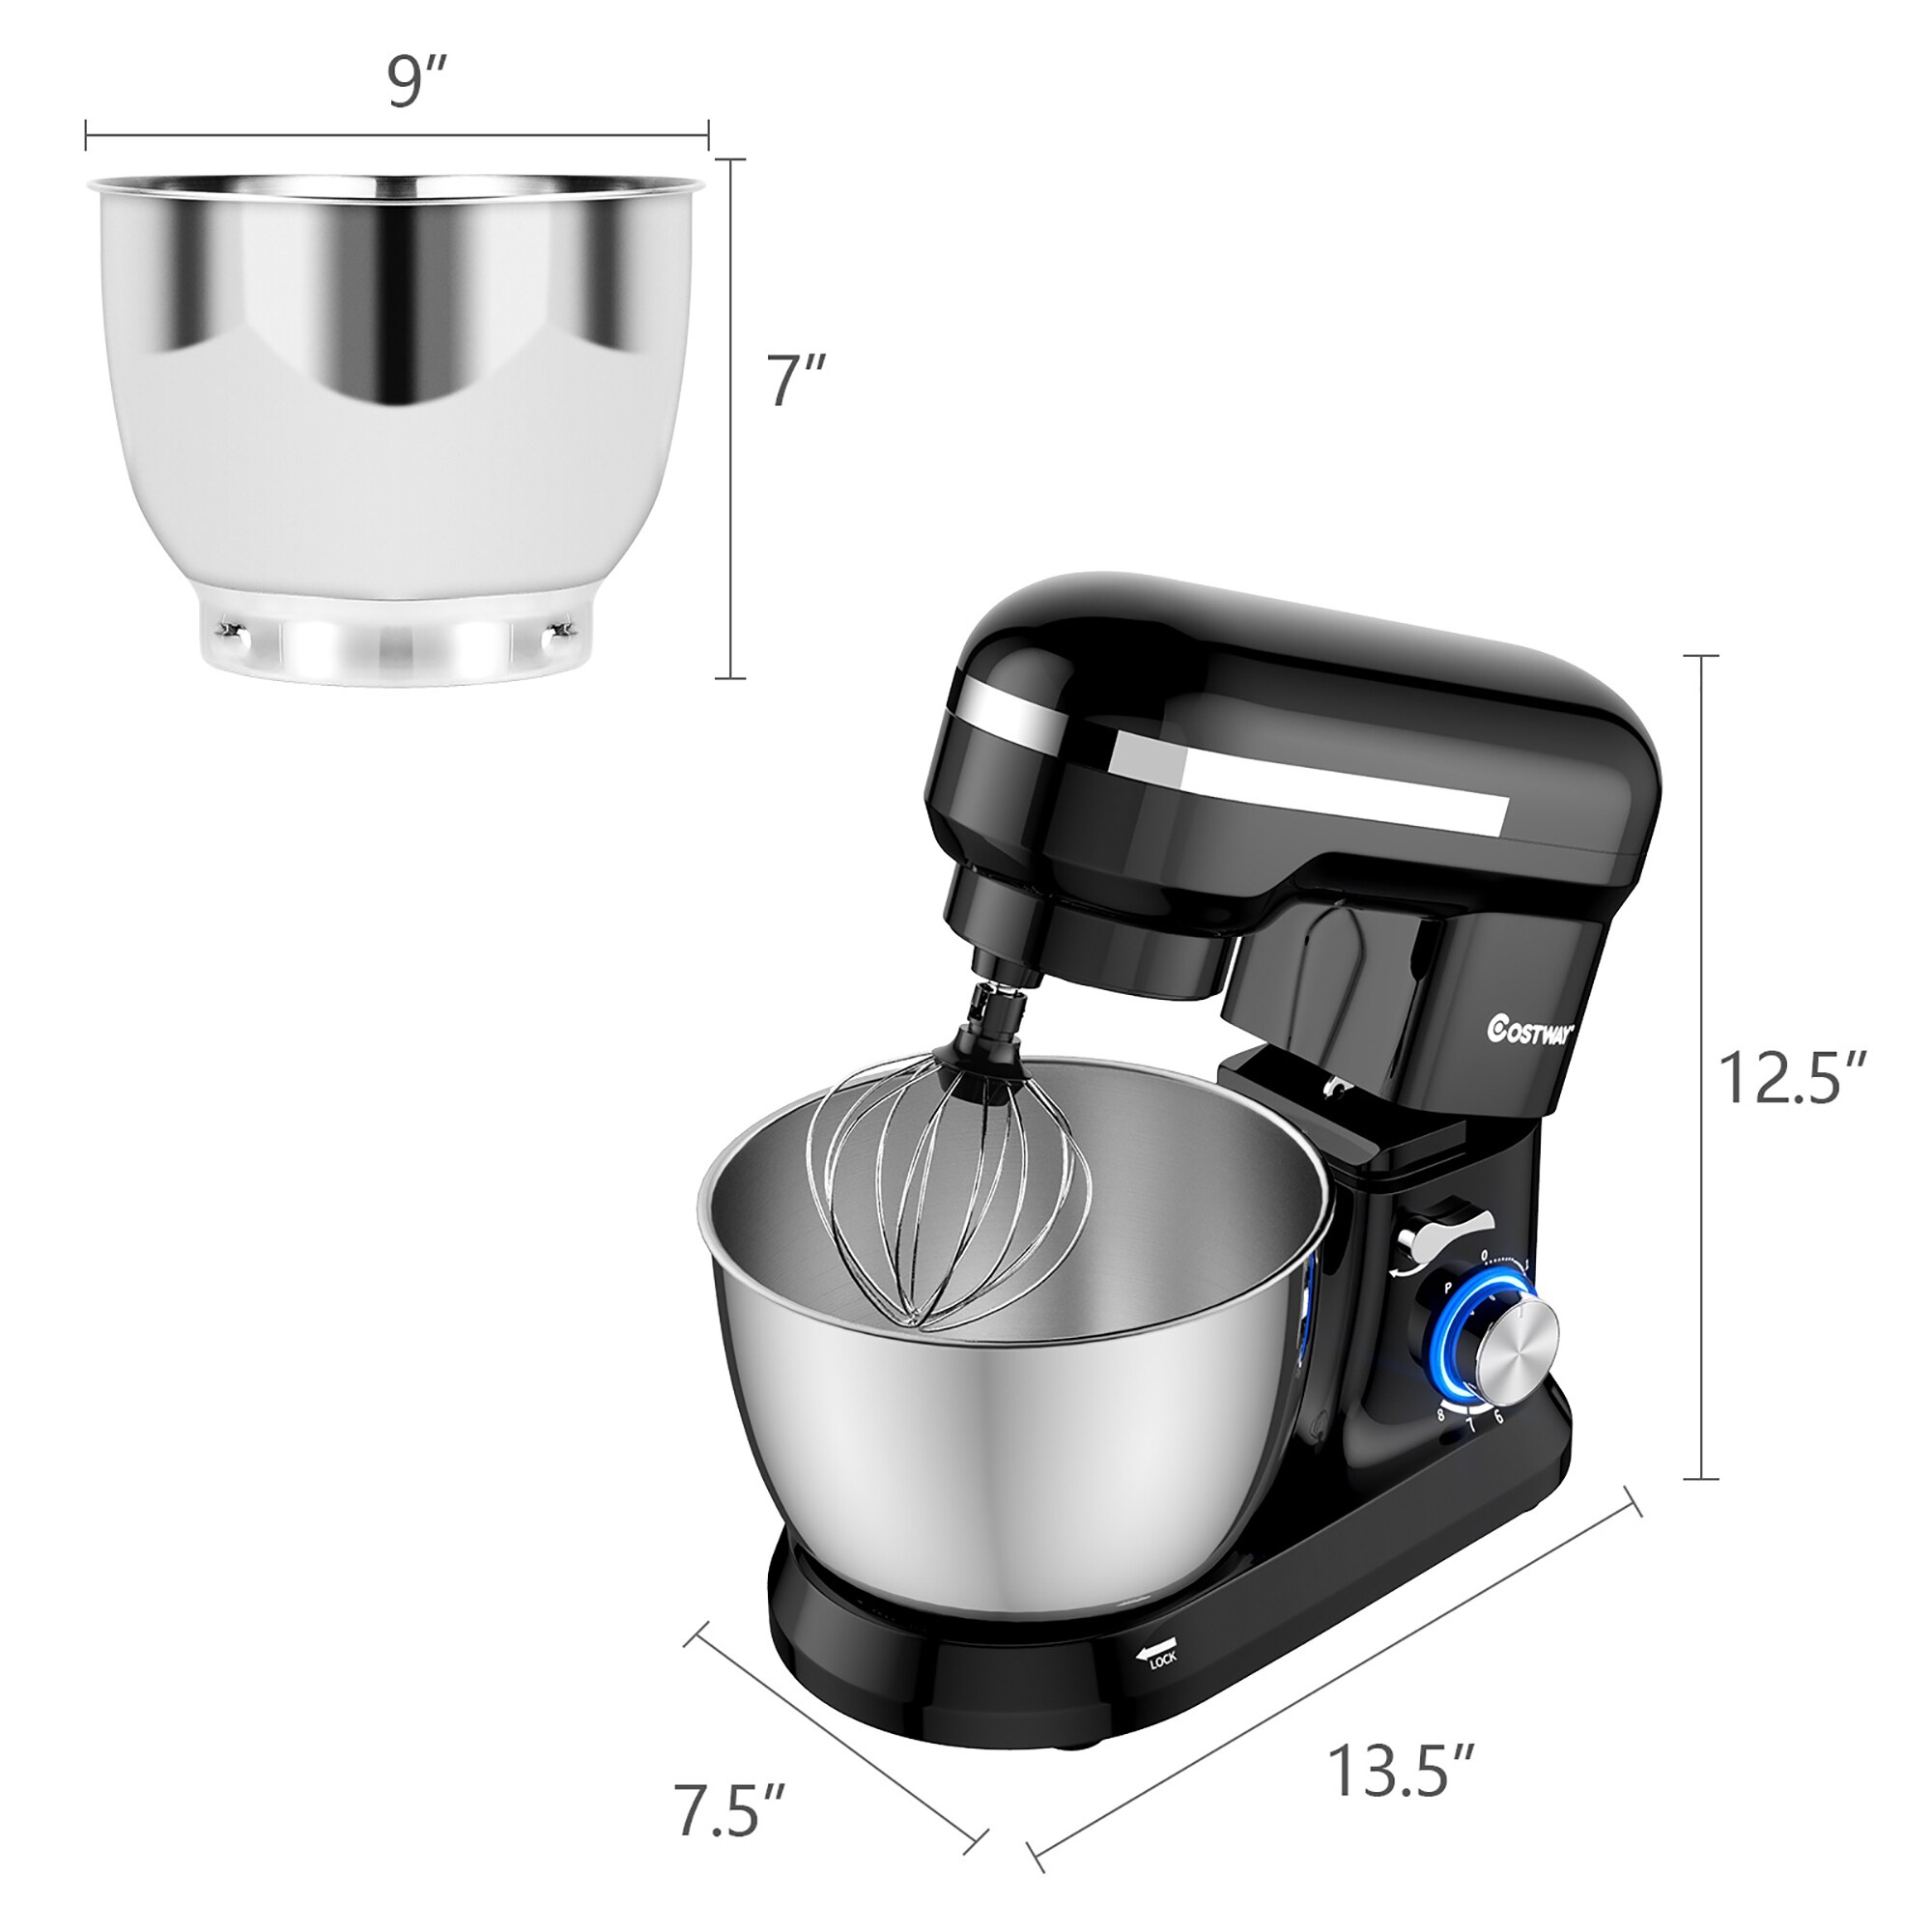 Costway 4.8 QT Stand Mixer 8-speed Electric Food Mixer w/Dough Hook -  13.5'' x 7.5'' x 12.5''(L x W x H) - On Sale - Bed Bath & Beyond - 33563313